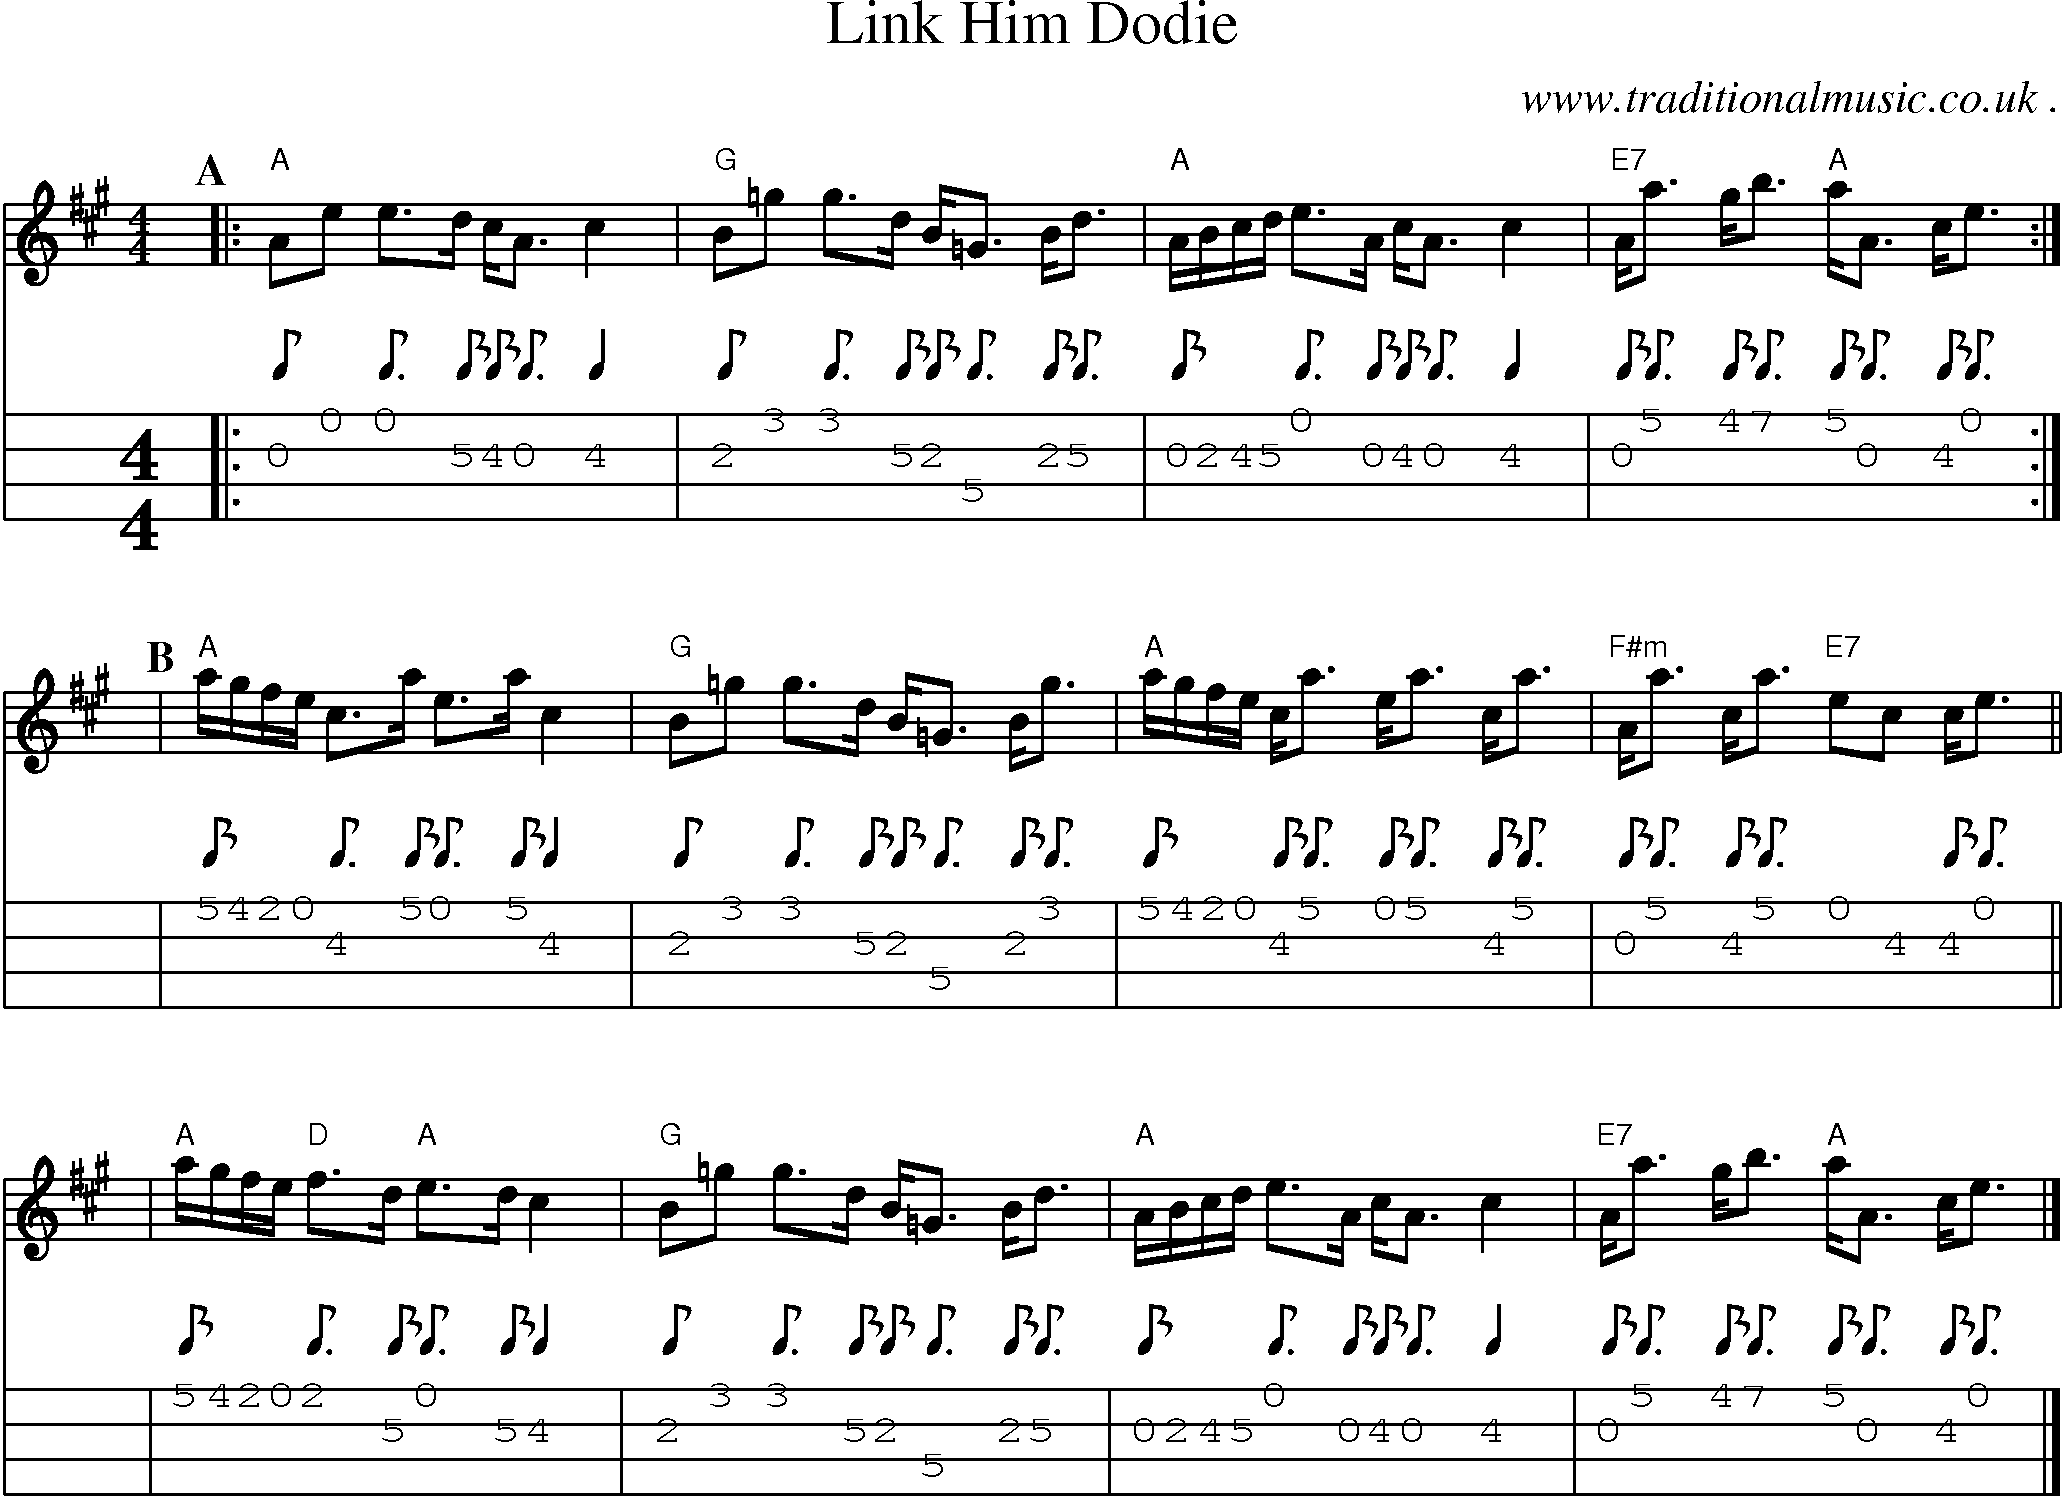 Sheet-music  score, Chords and Mandolin Tabs for Link Him Dodie